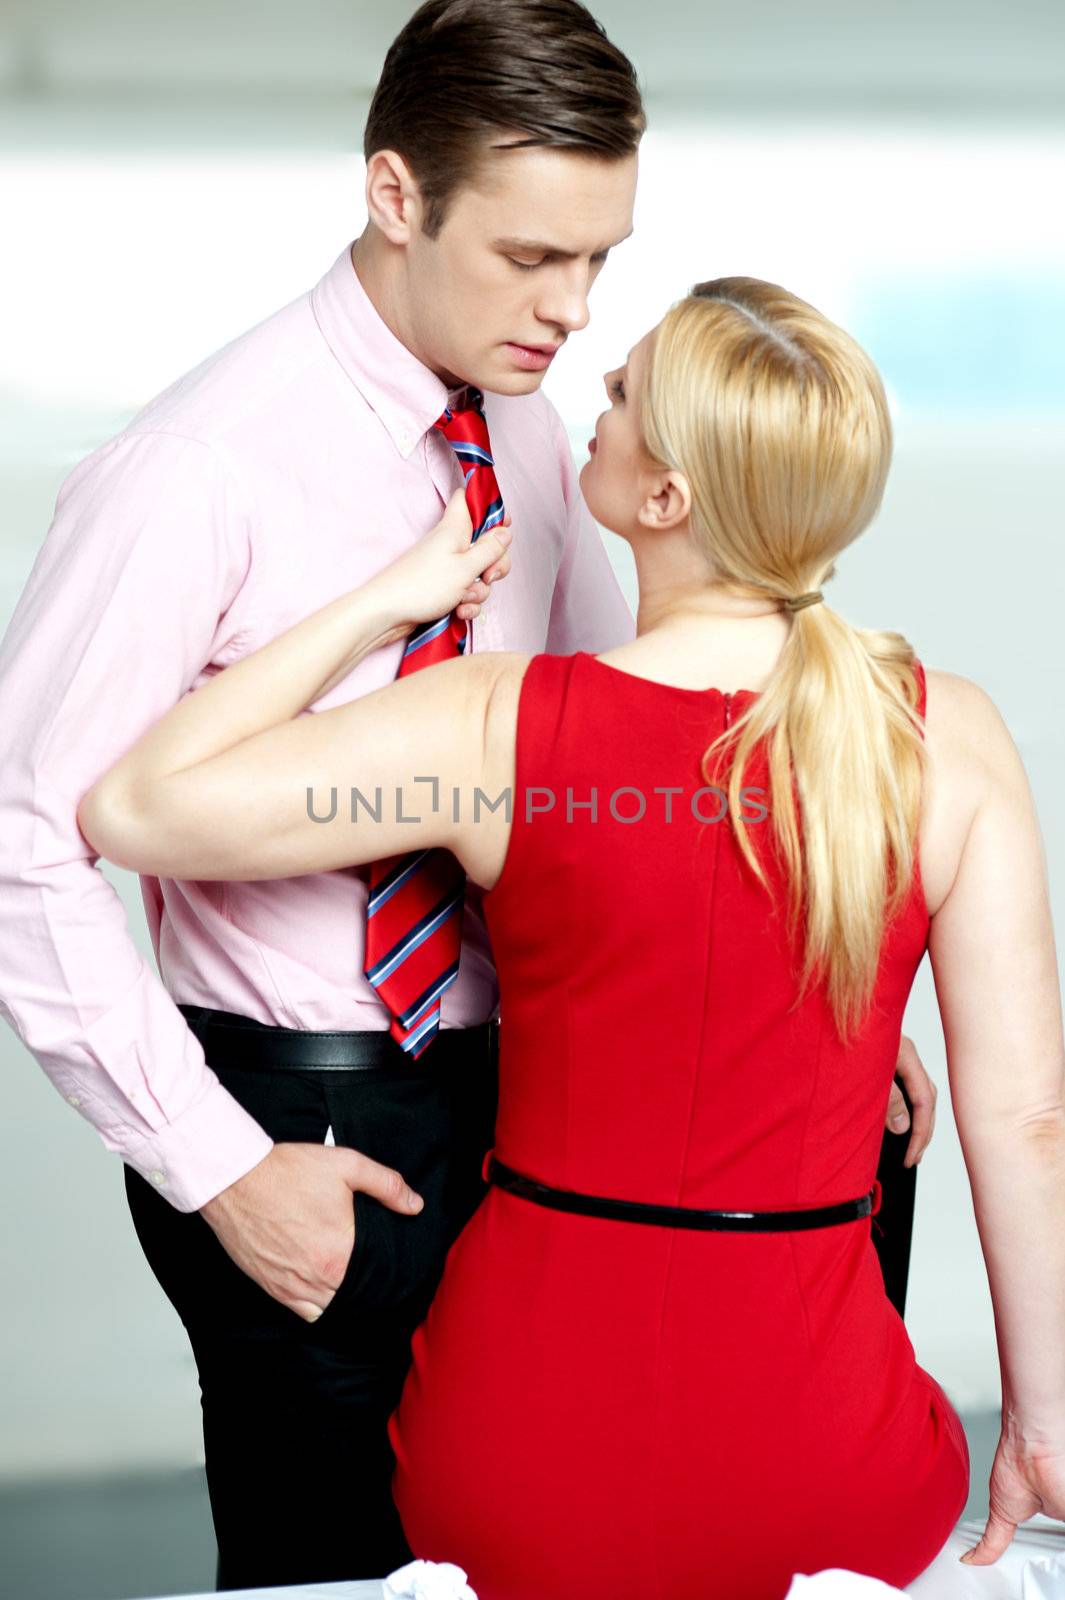 Woman pulling man from his tie. Feeling naughty. About to kiss inside office